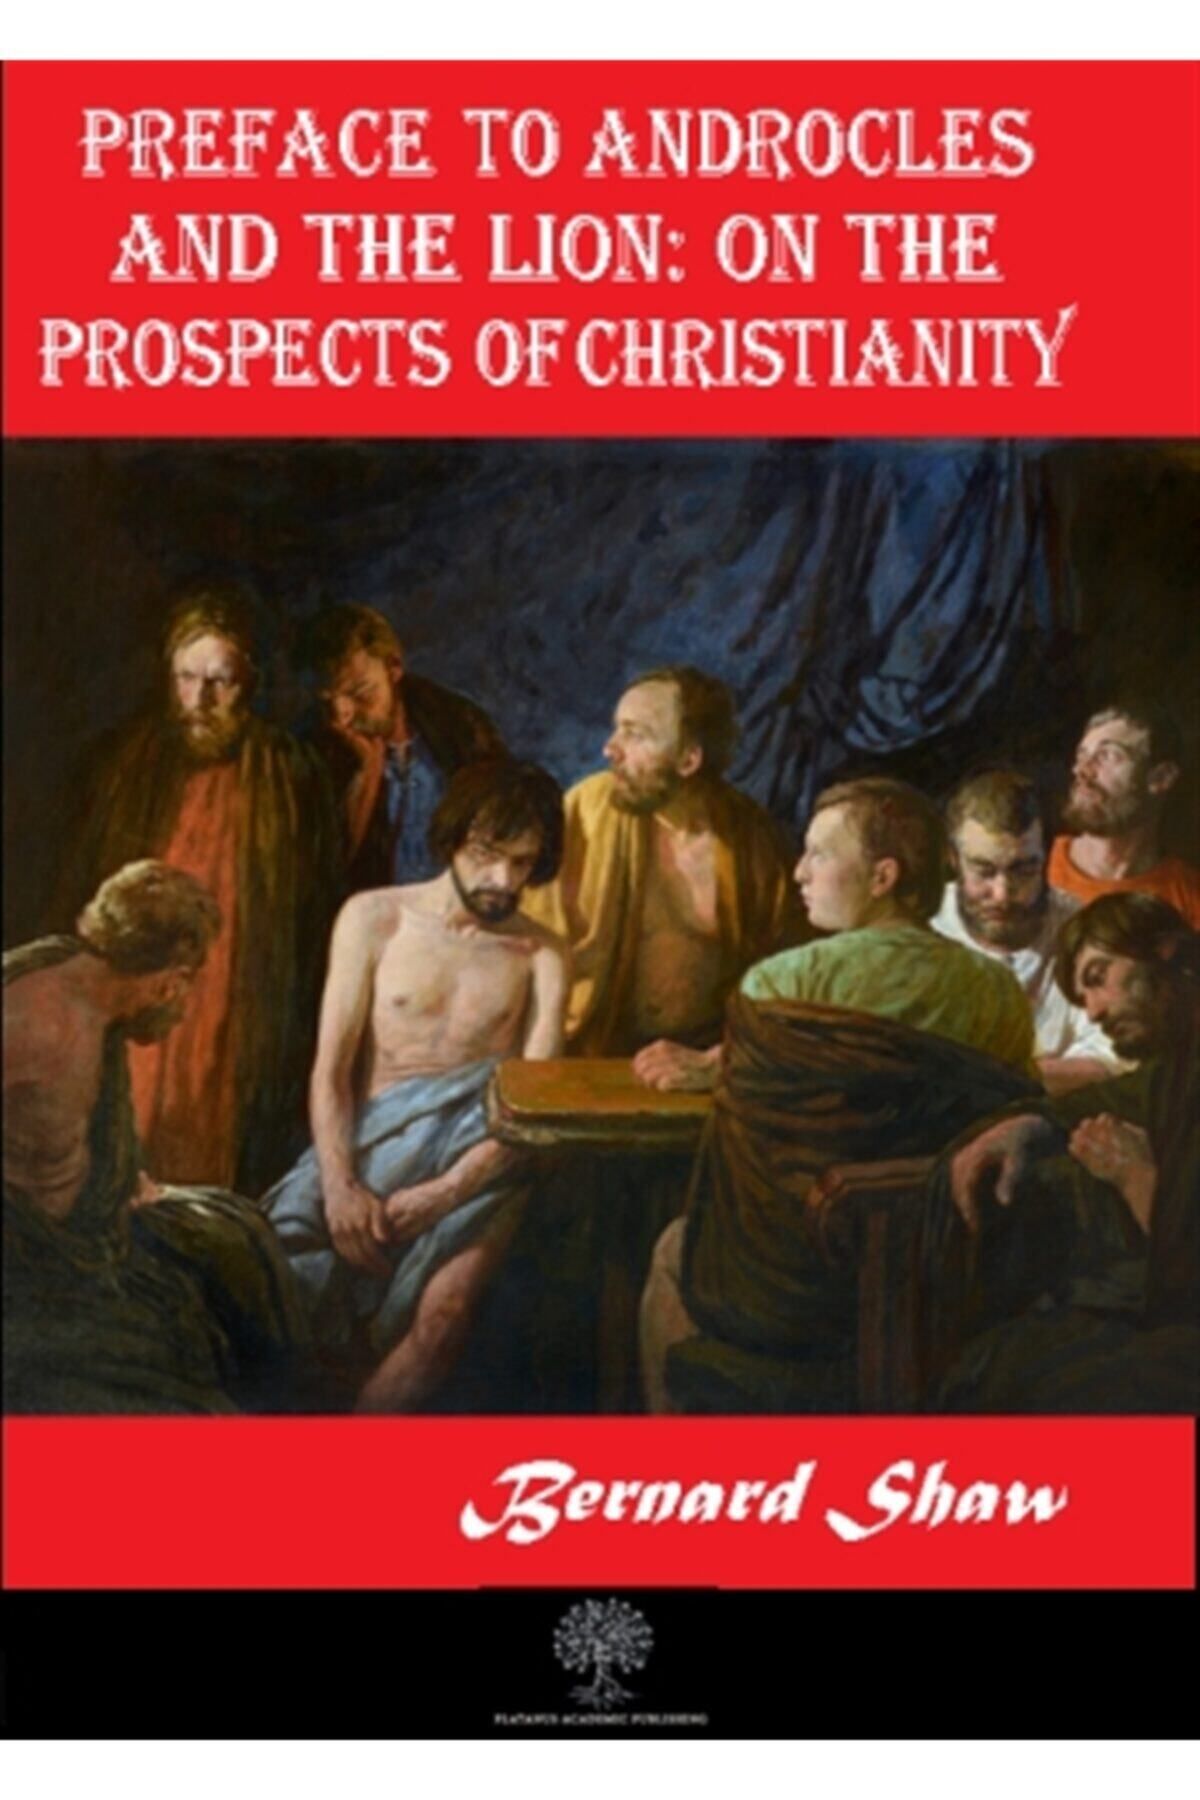 Platanus Publishing Preface To Androcles And The Lion: On The Prospects Of Christianity